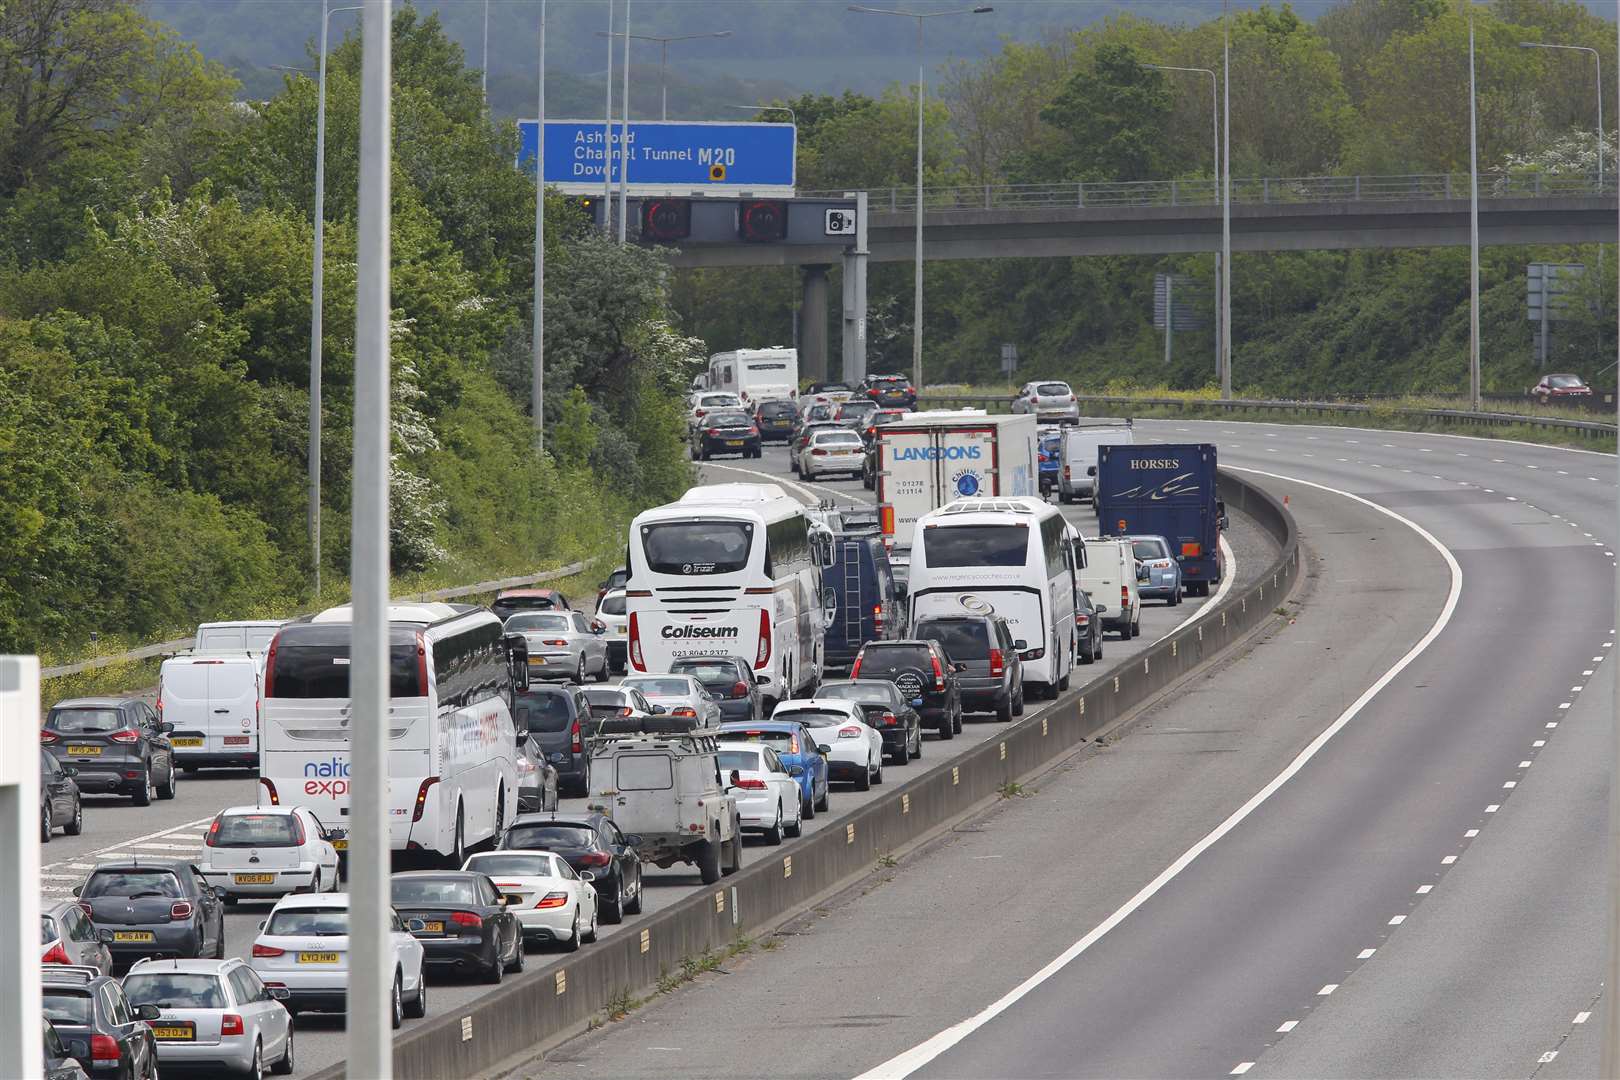 Motorway users are expected to suffer due to works on the M20 and M2